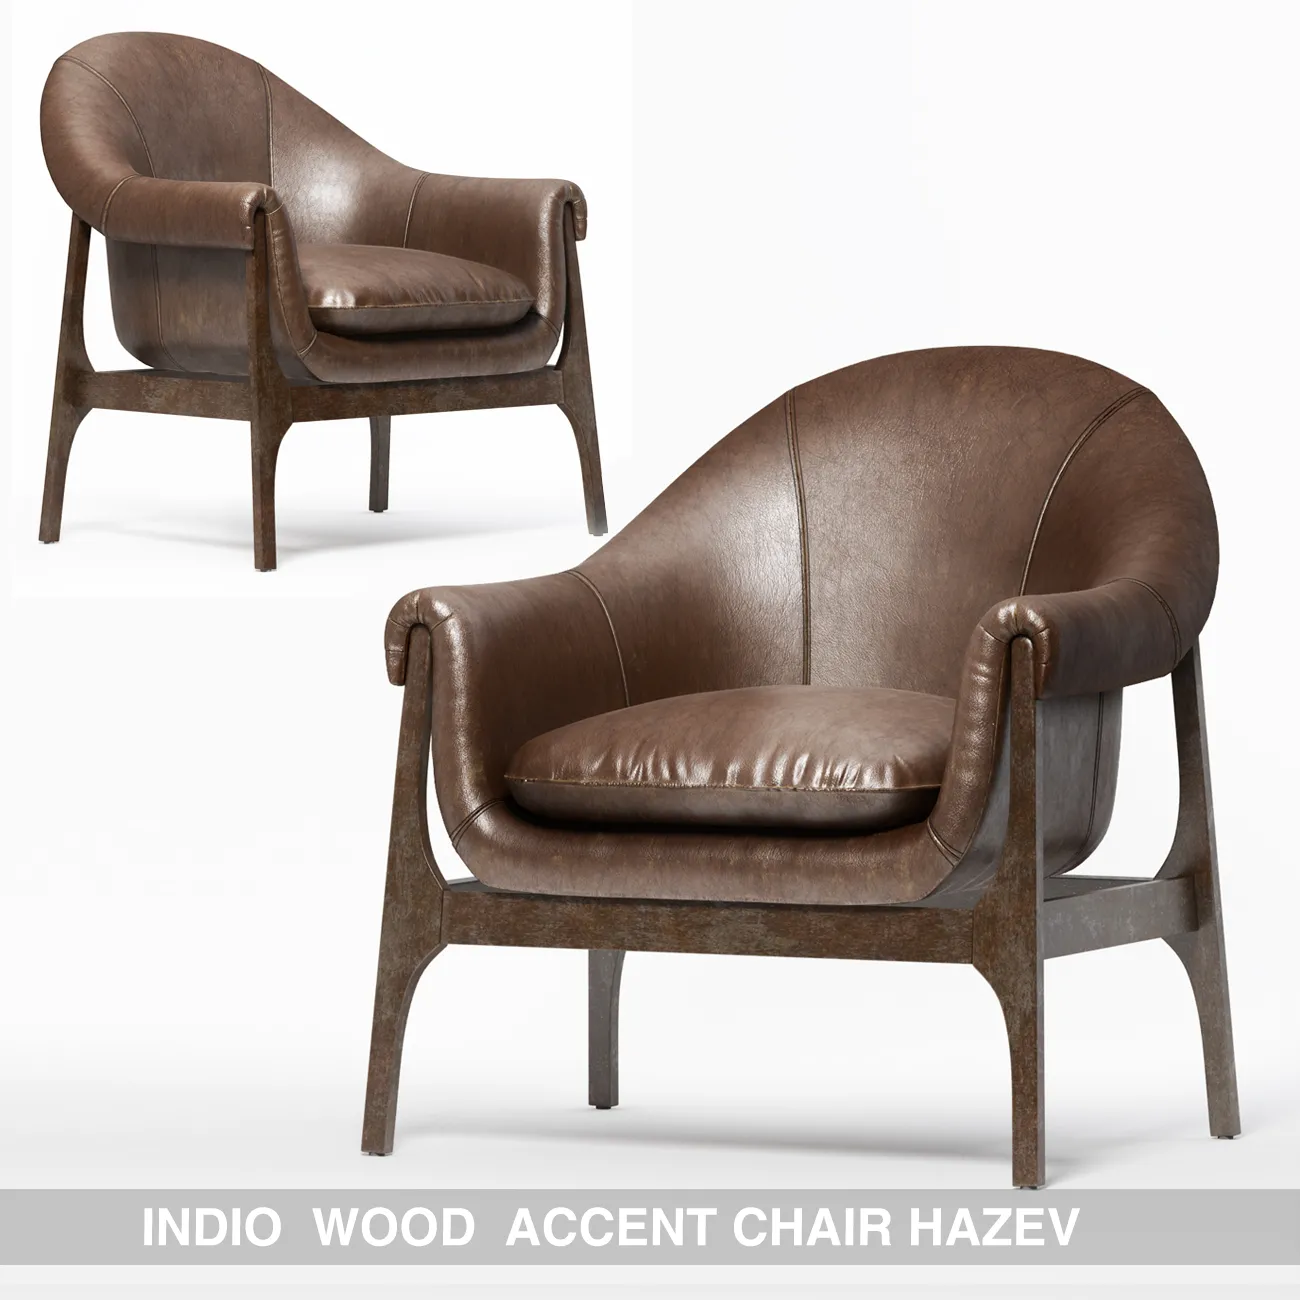 INDIO WOOD ACCENT CHAIR IN HAZE – 4112